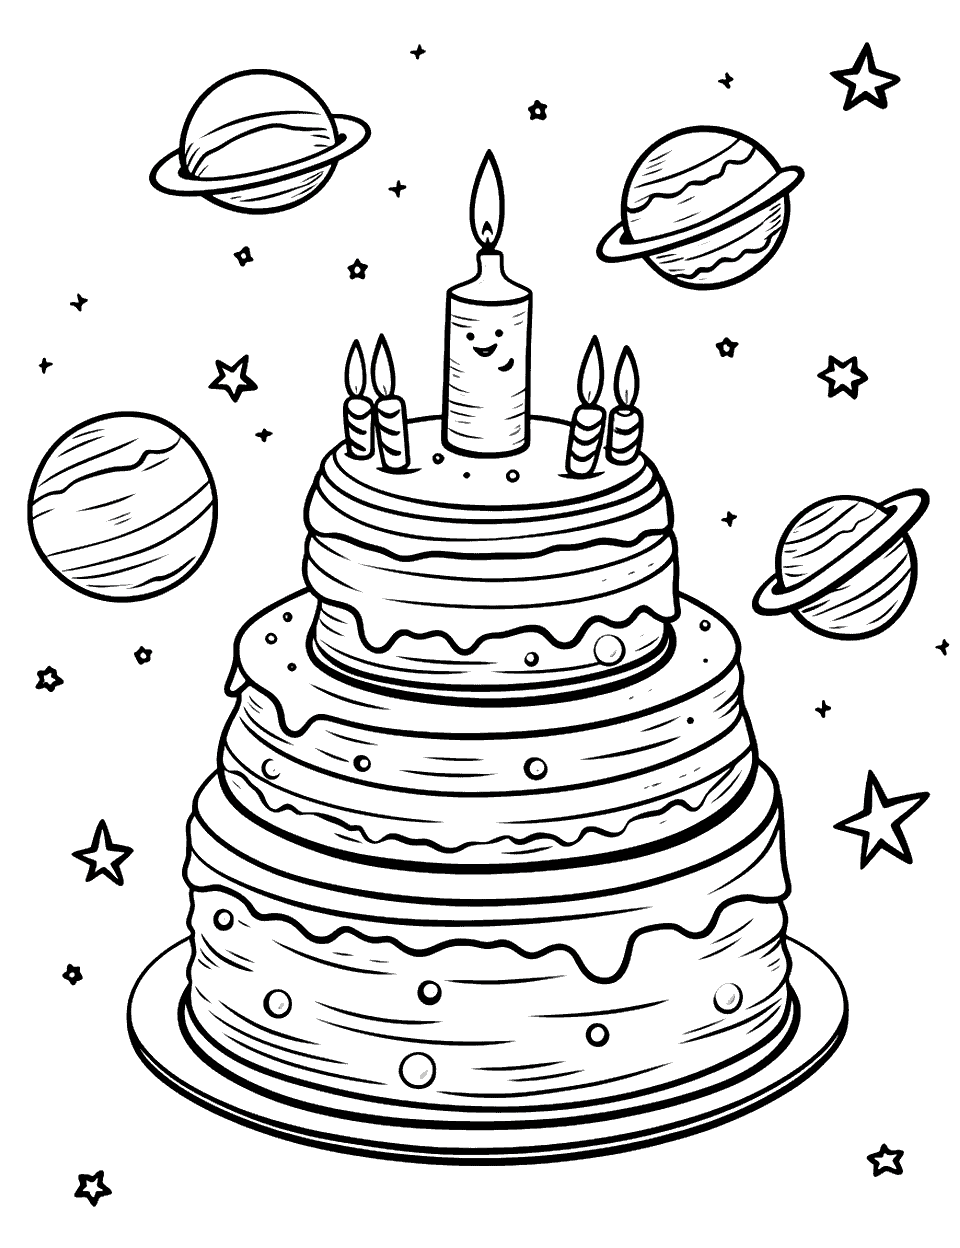 Space-Themed Celebration Cake Coloring Page - A space-themed cake with planets and stars.